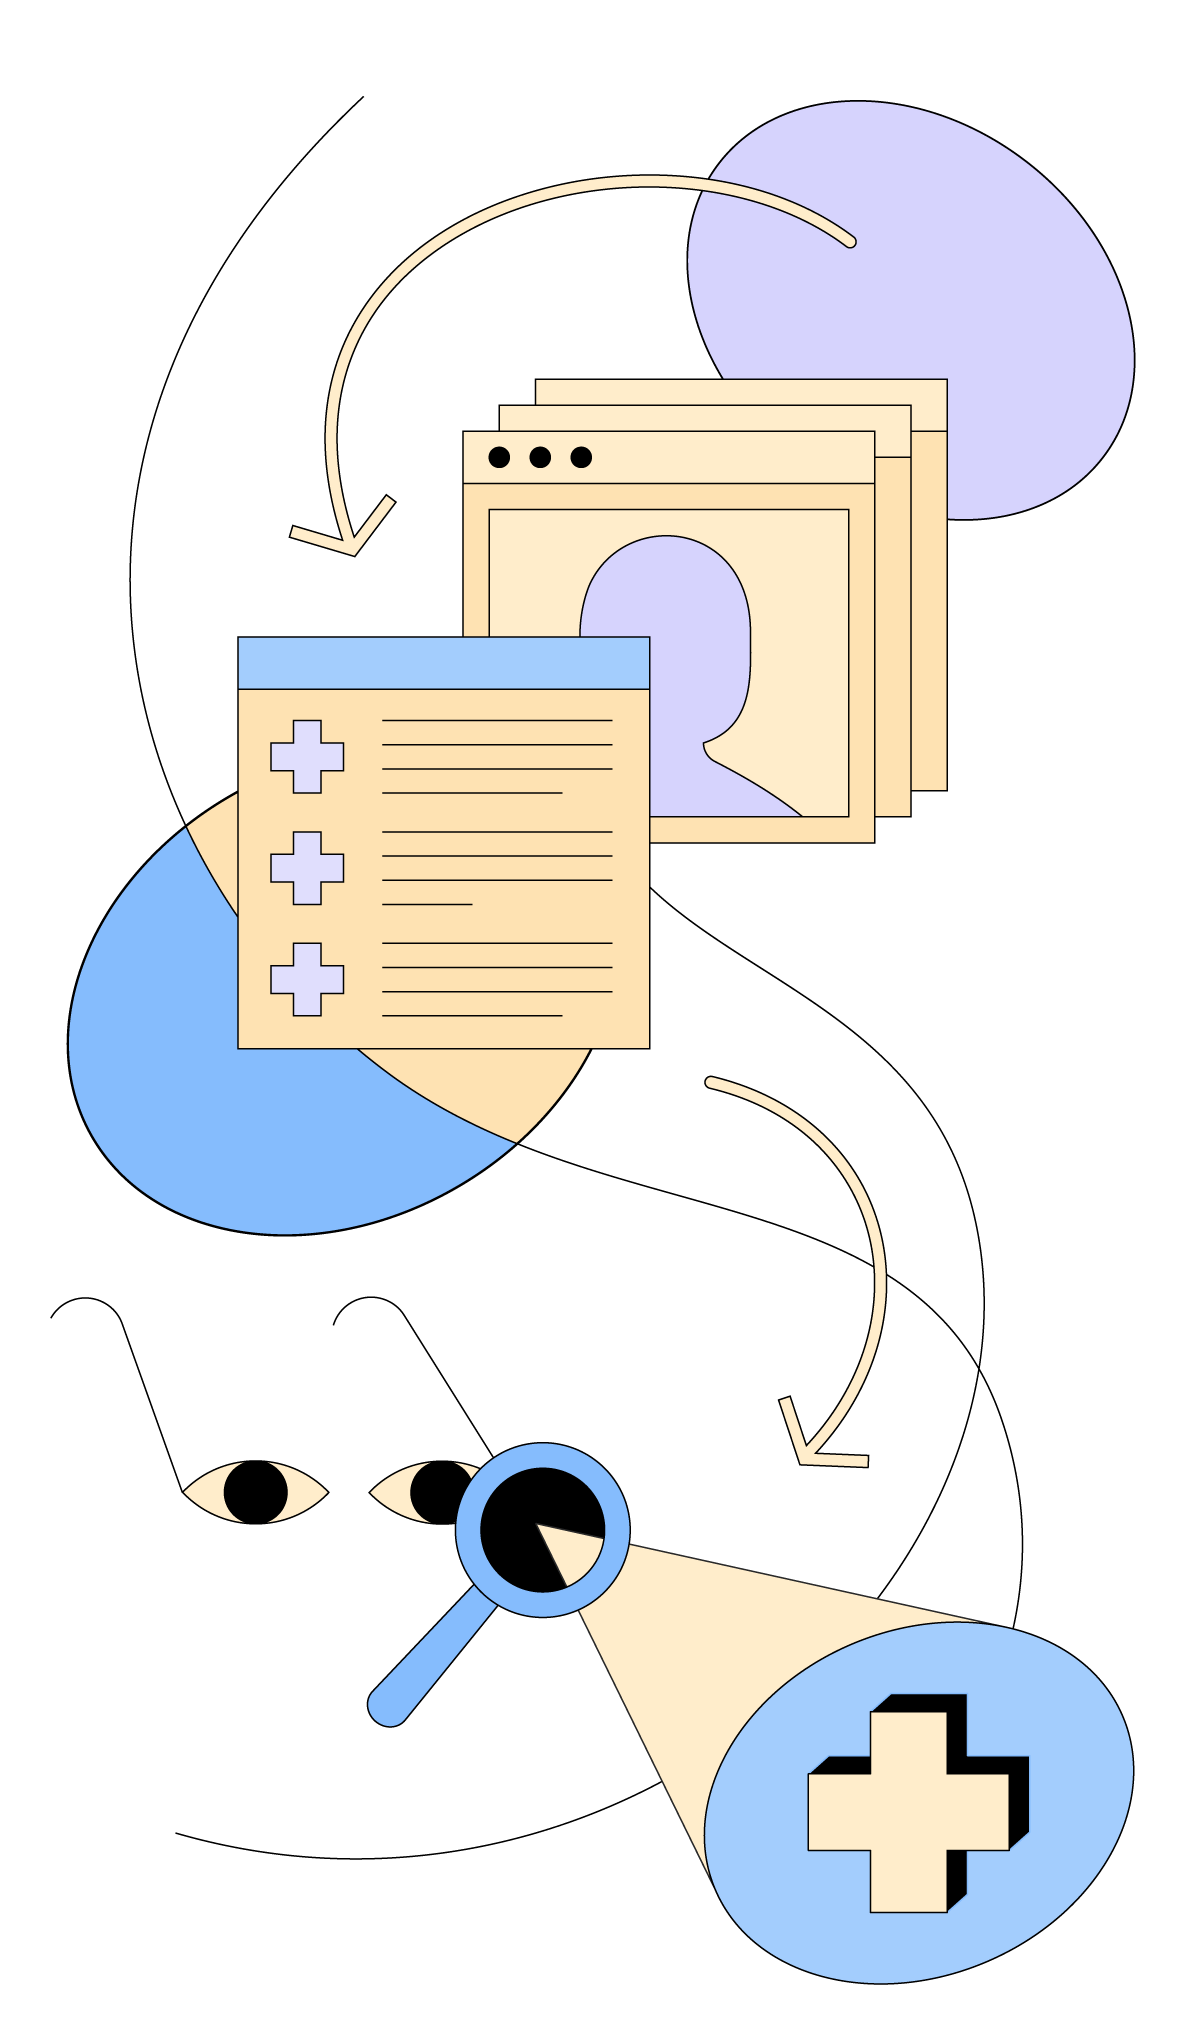 Abstract, cartoon graphic depicting an online database with user profiles, a checklist and a pair of glasses.